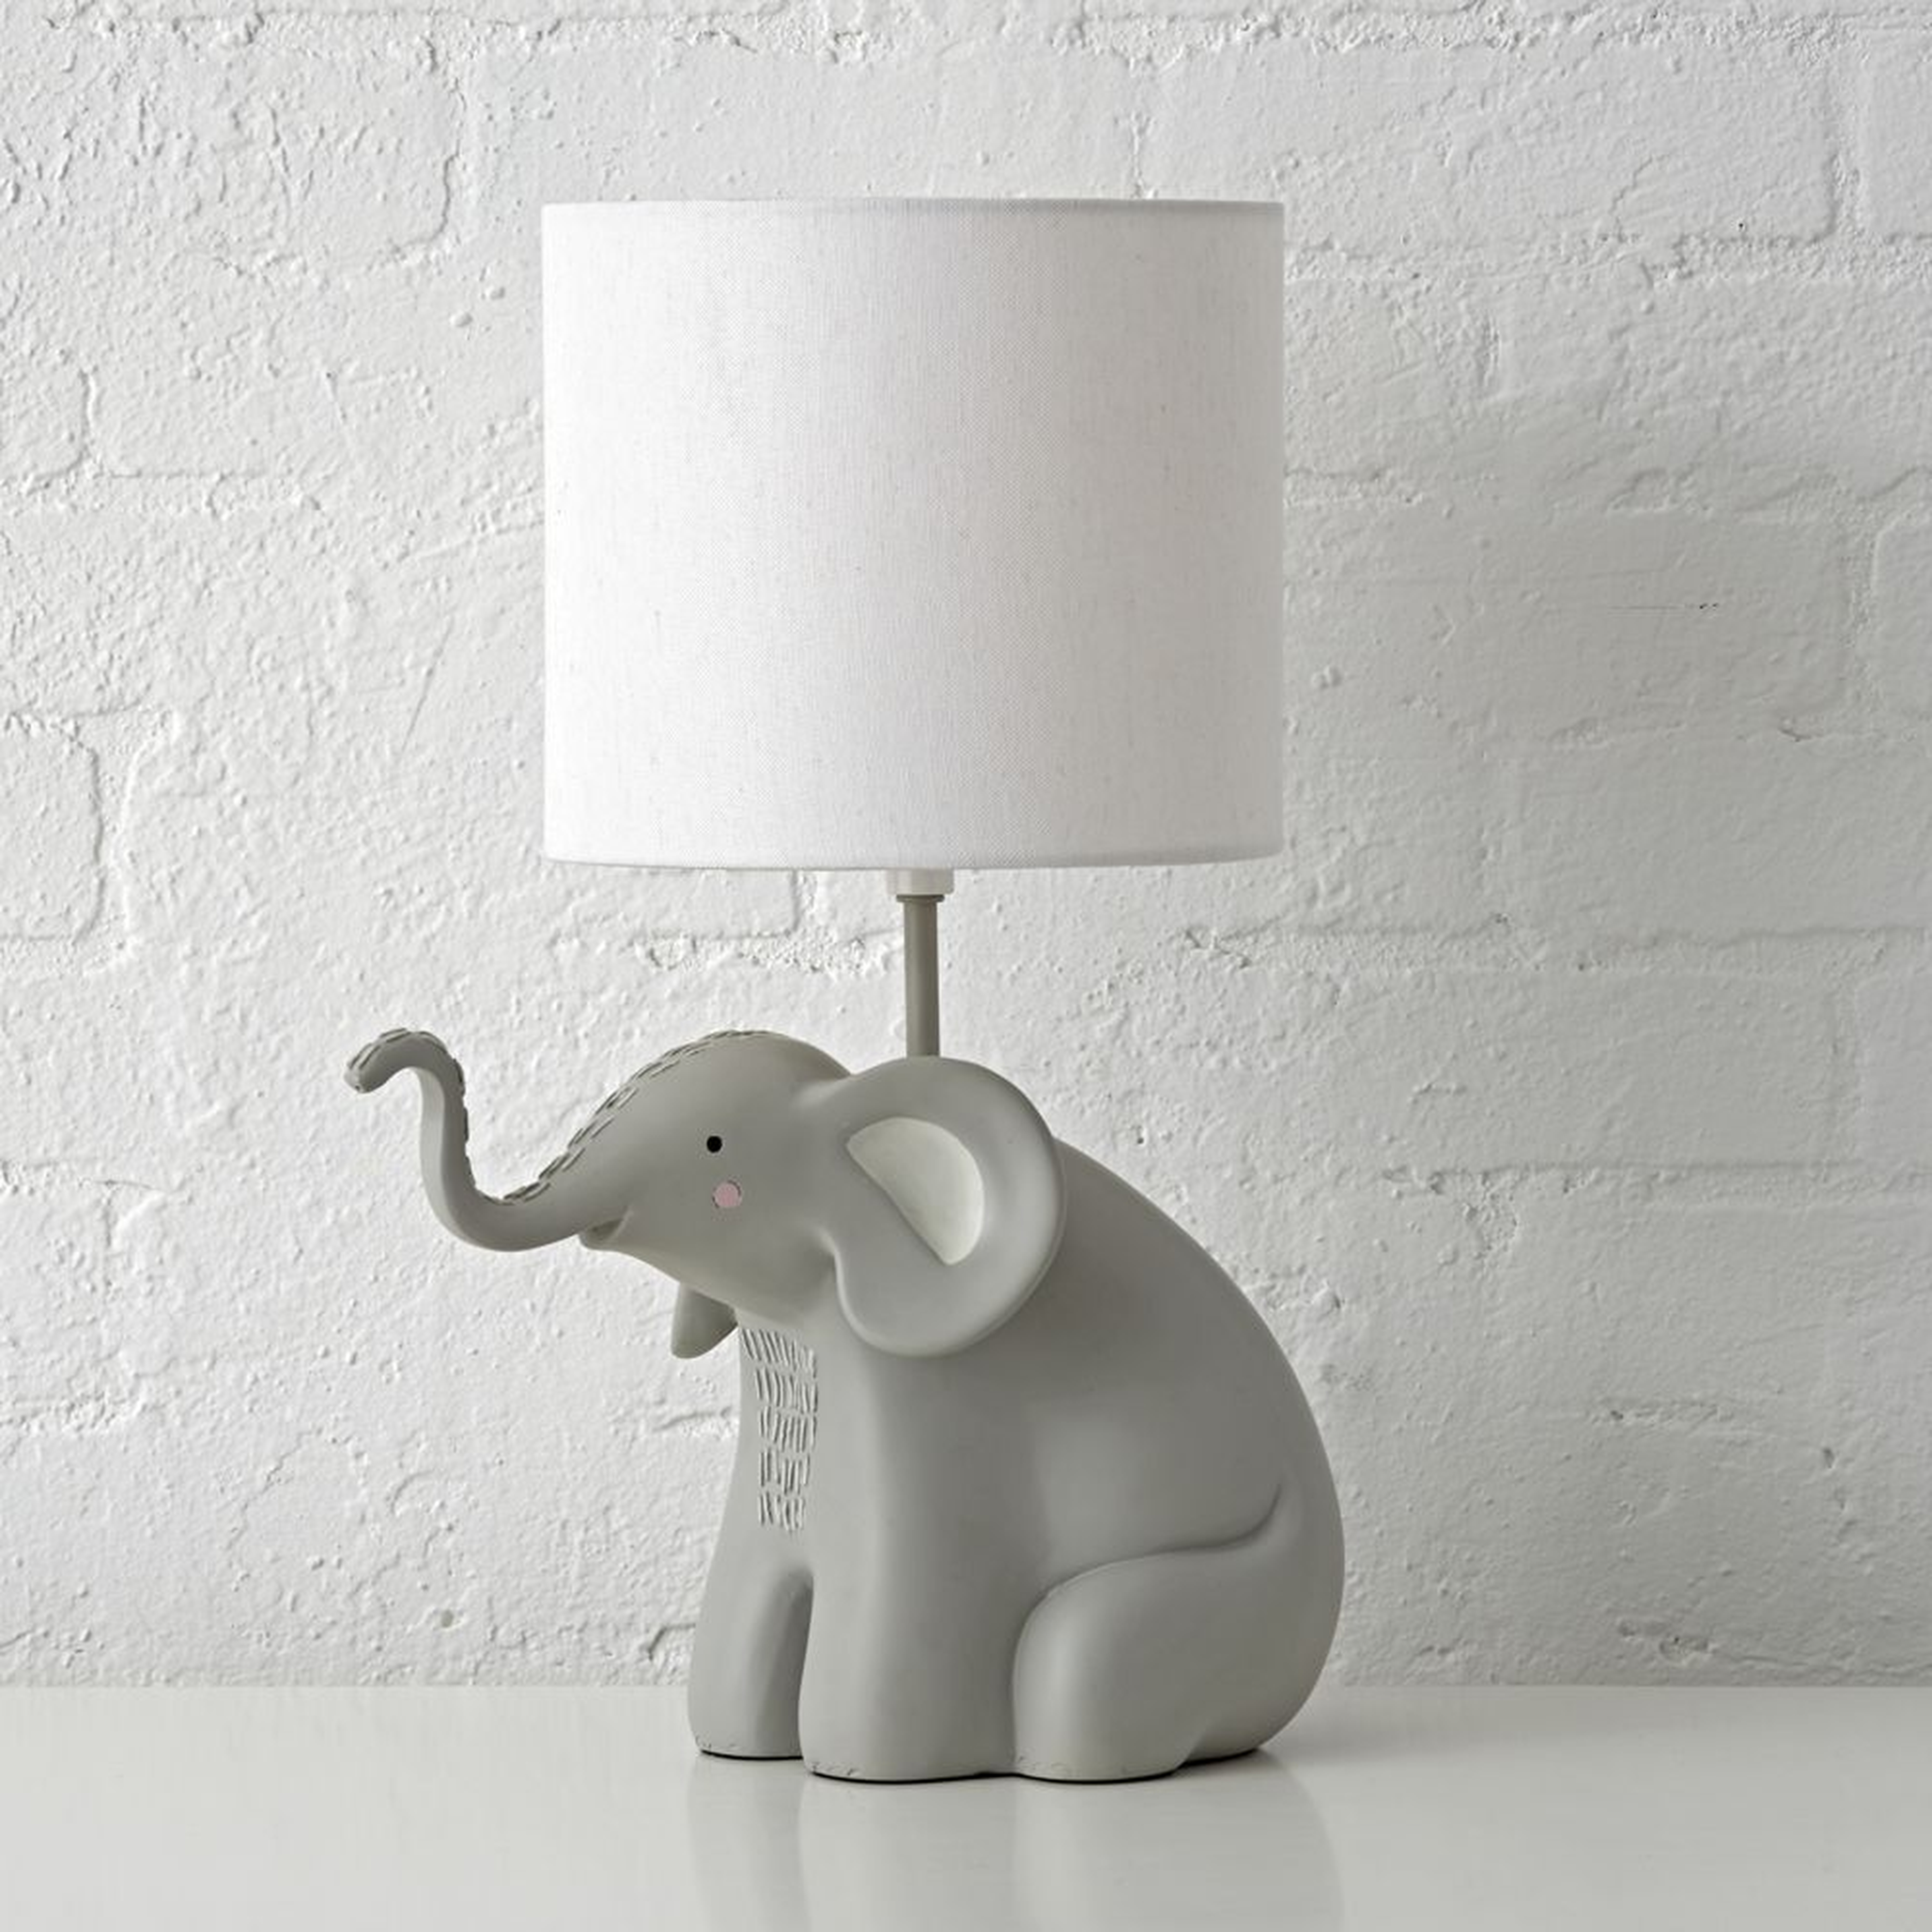 Elephant Table Lamp - Crate and Barrel